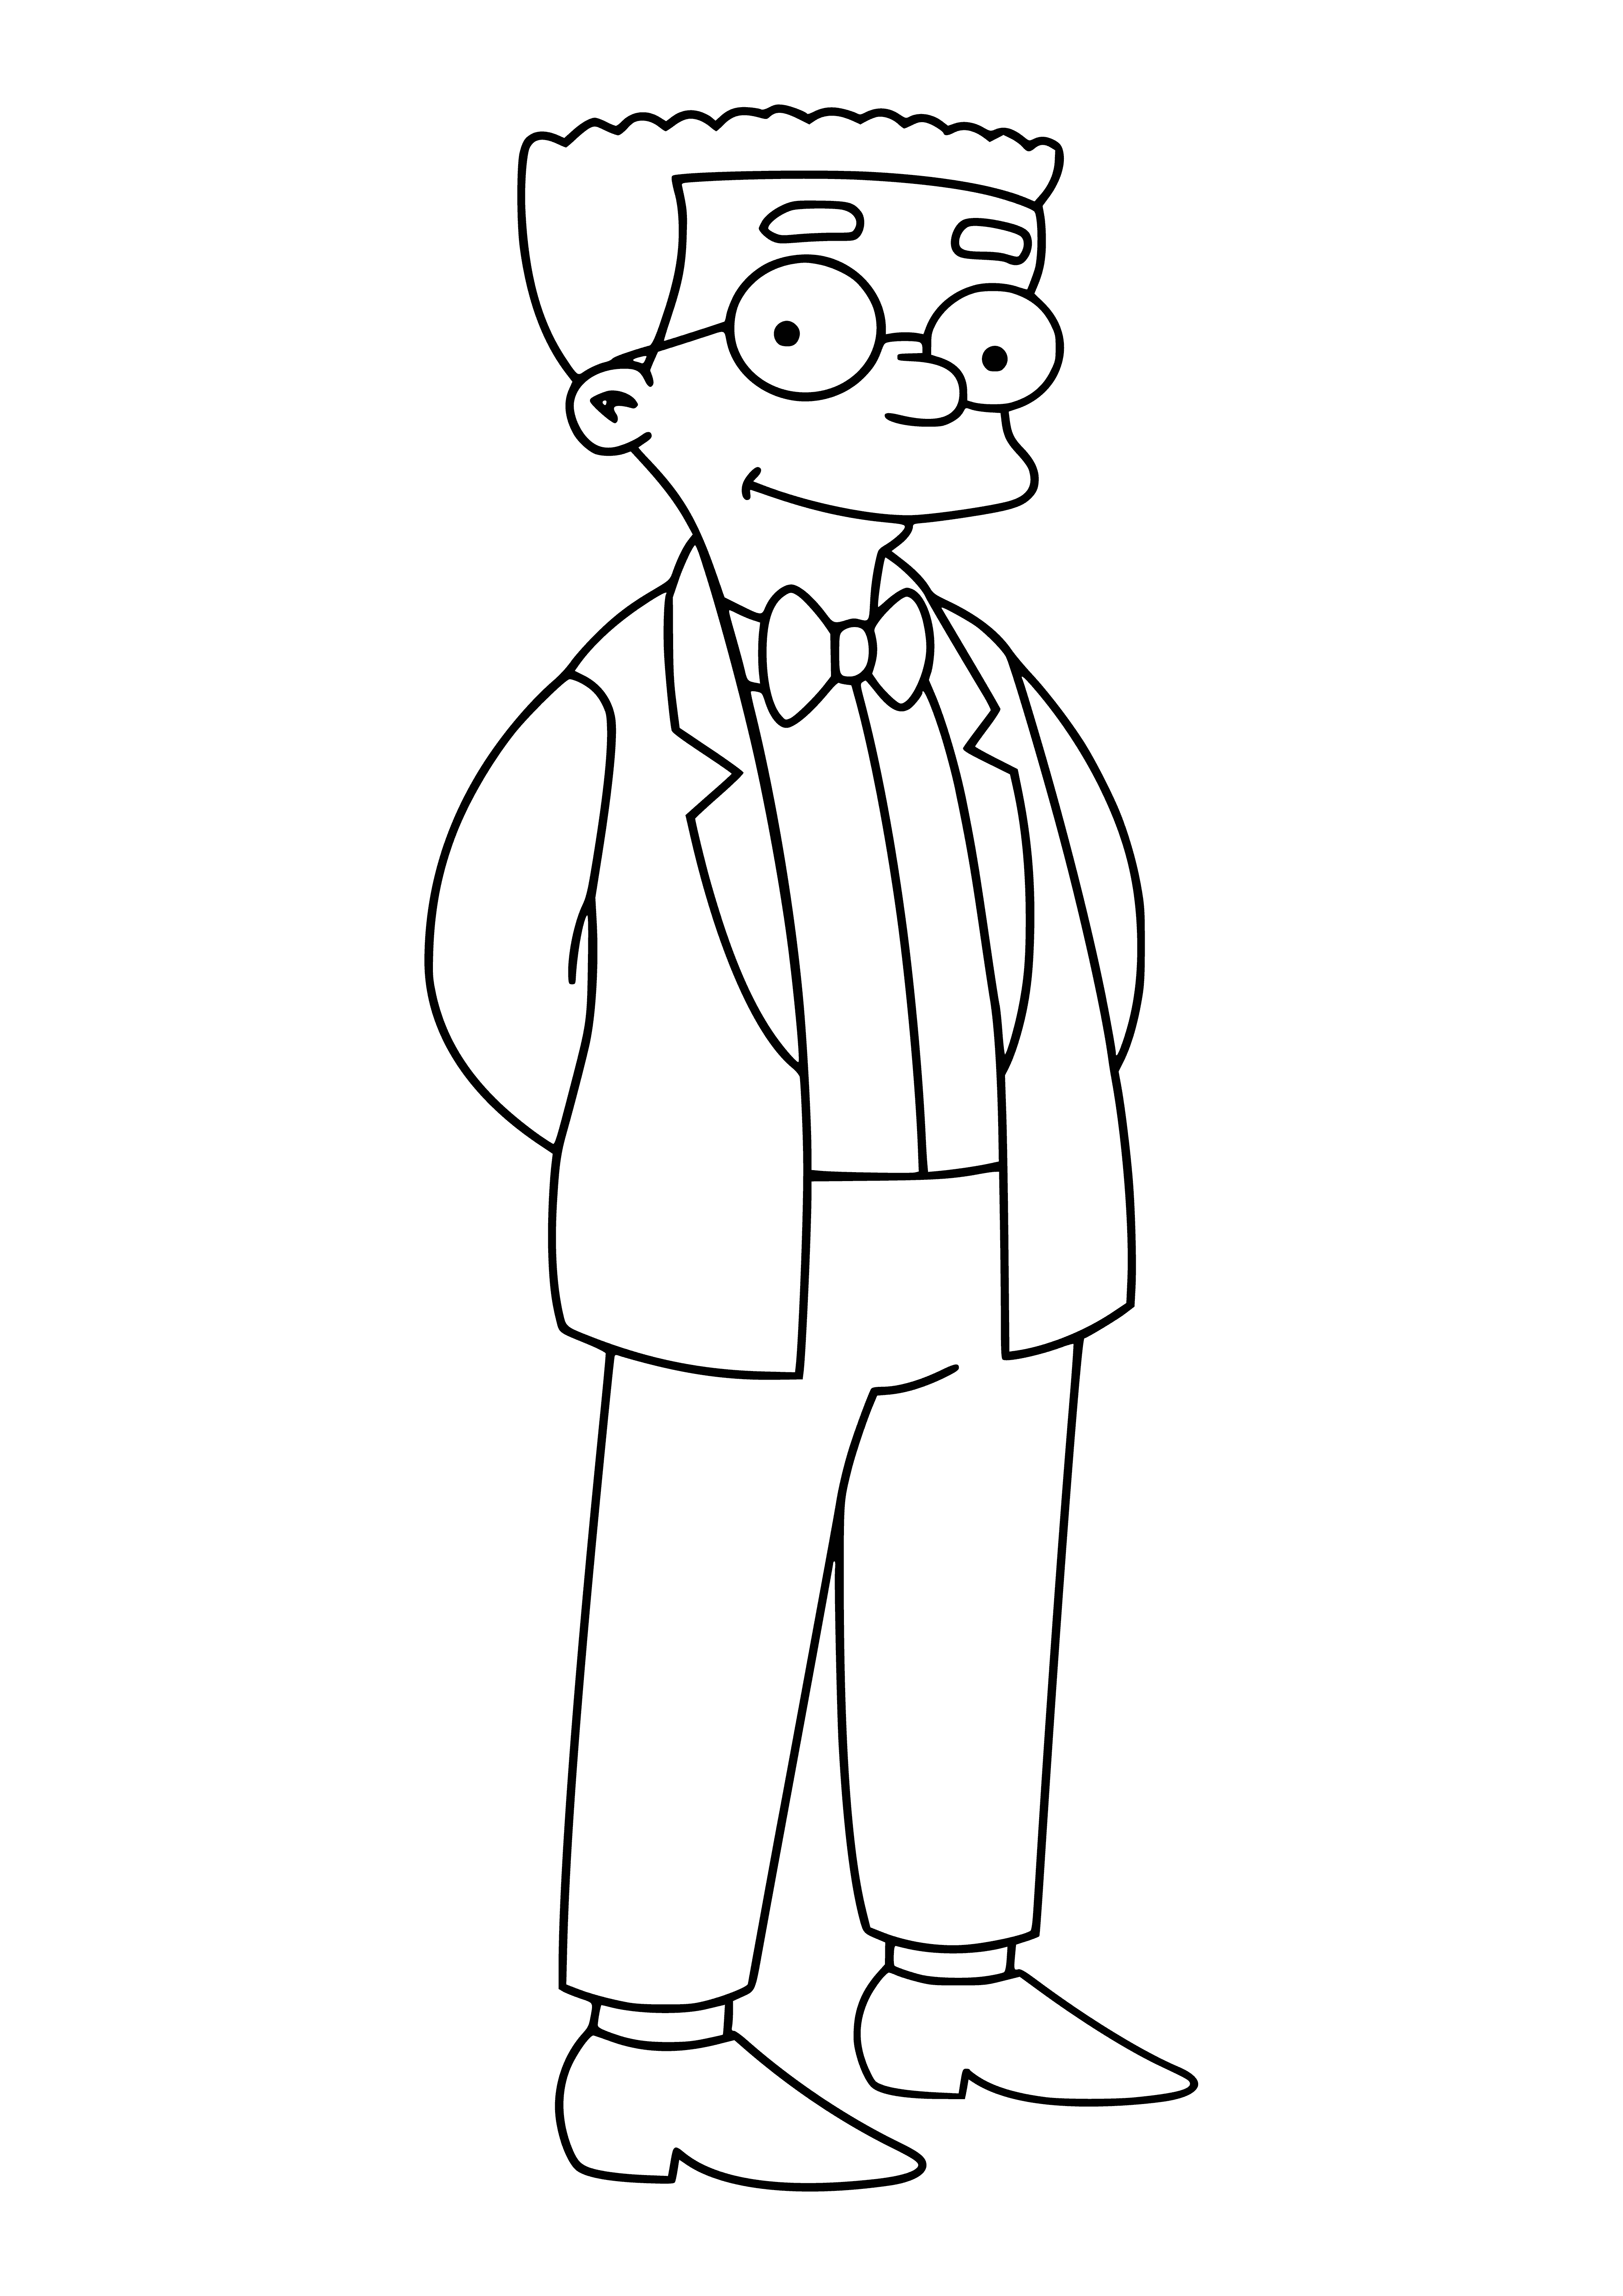 coloring page: Man in green shirt & blue tie looks at computer screen; dark brown hair & mustache. #colorpage